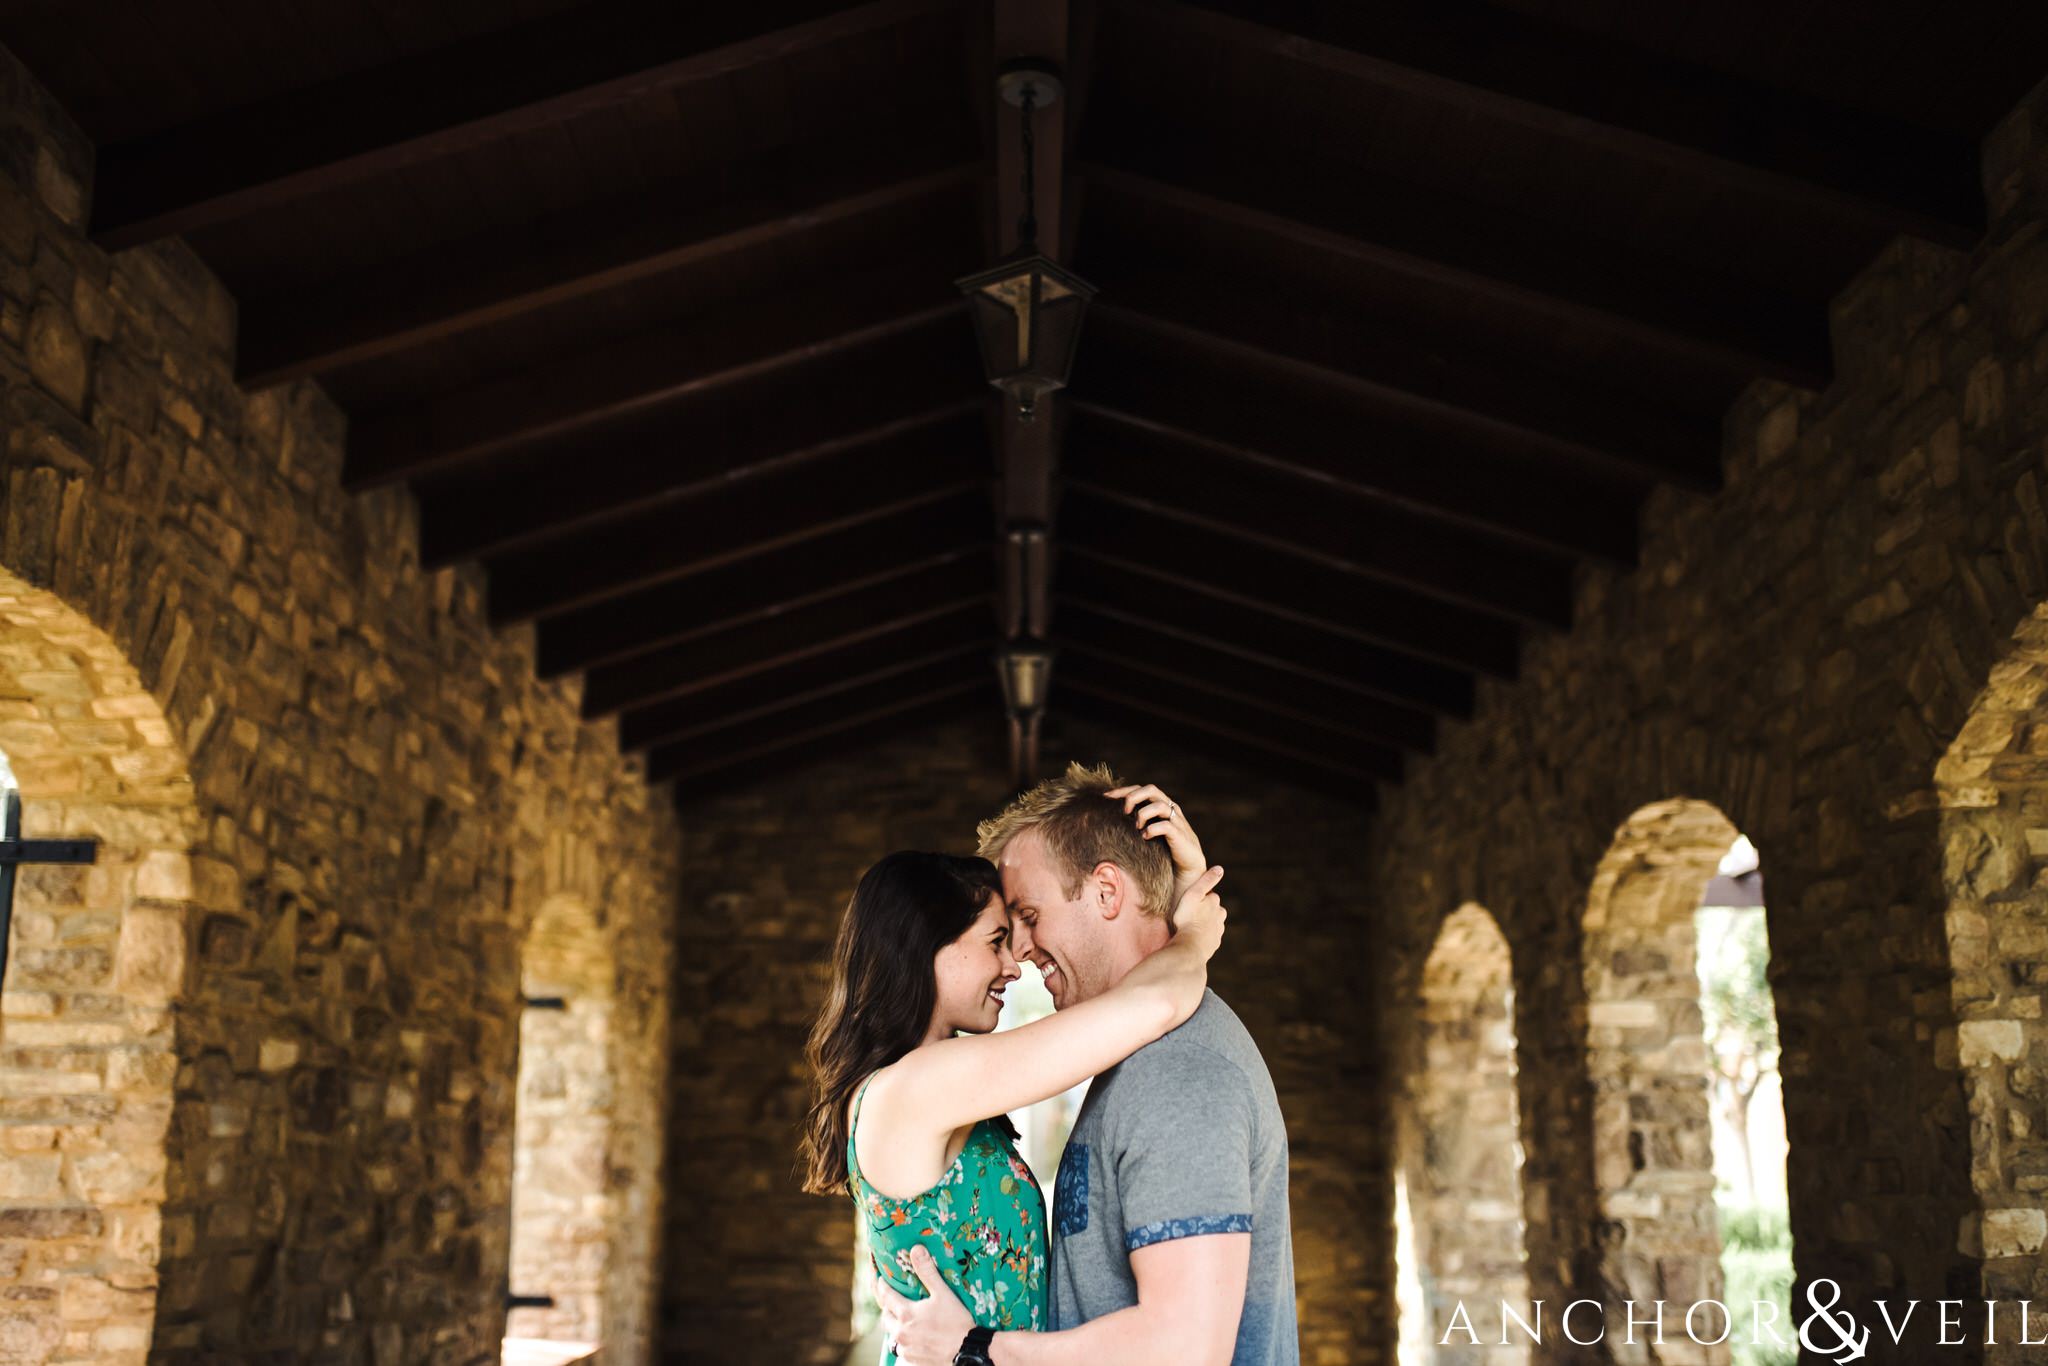 under the arches during their Laguna Beach Engagement Session 35